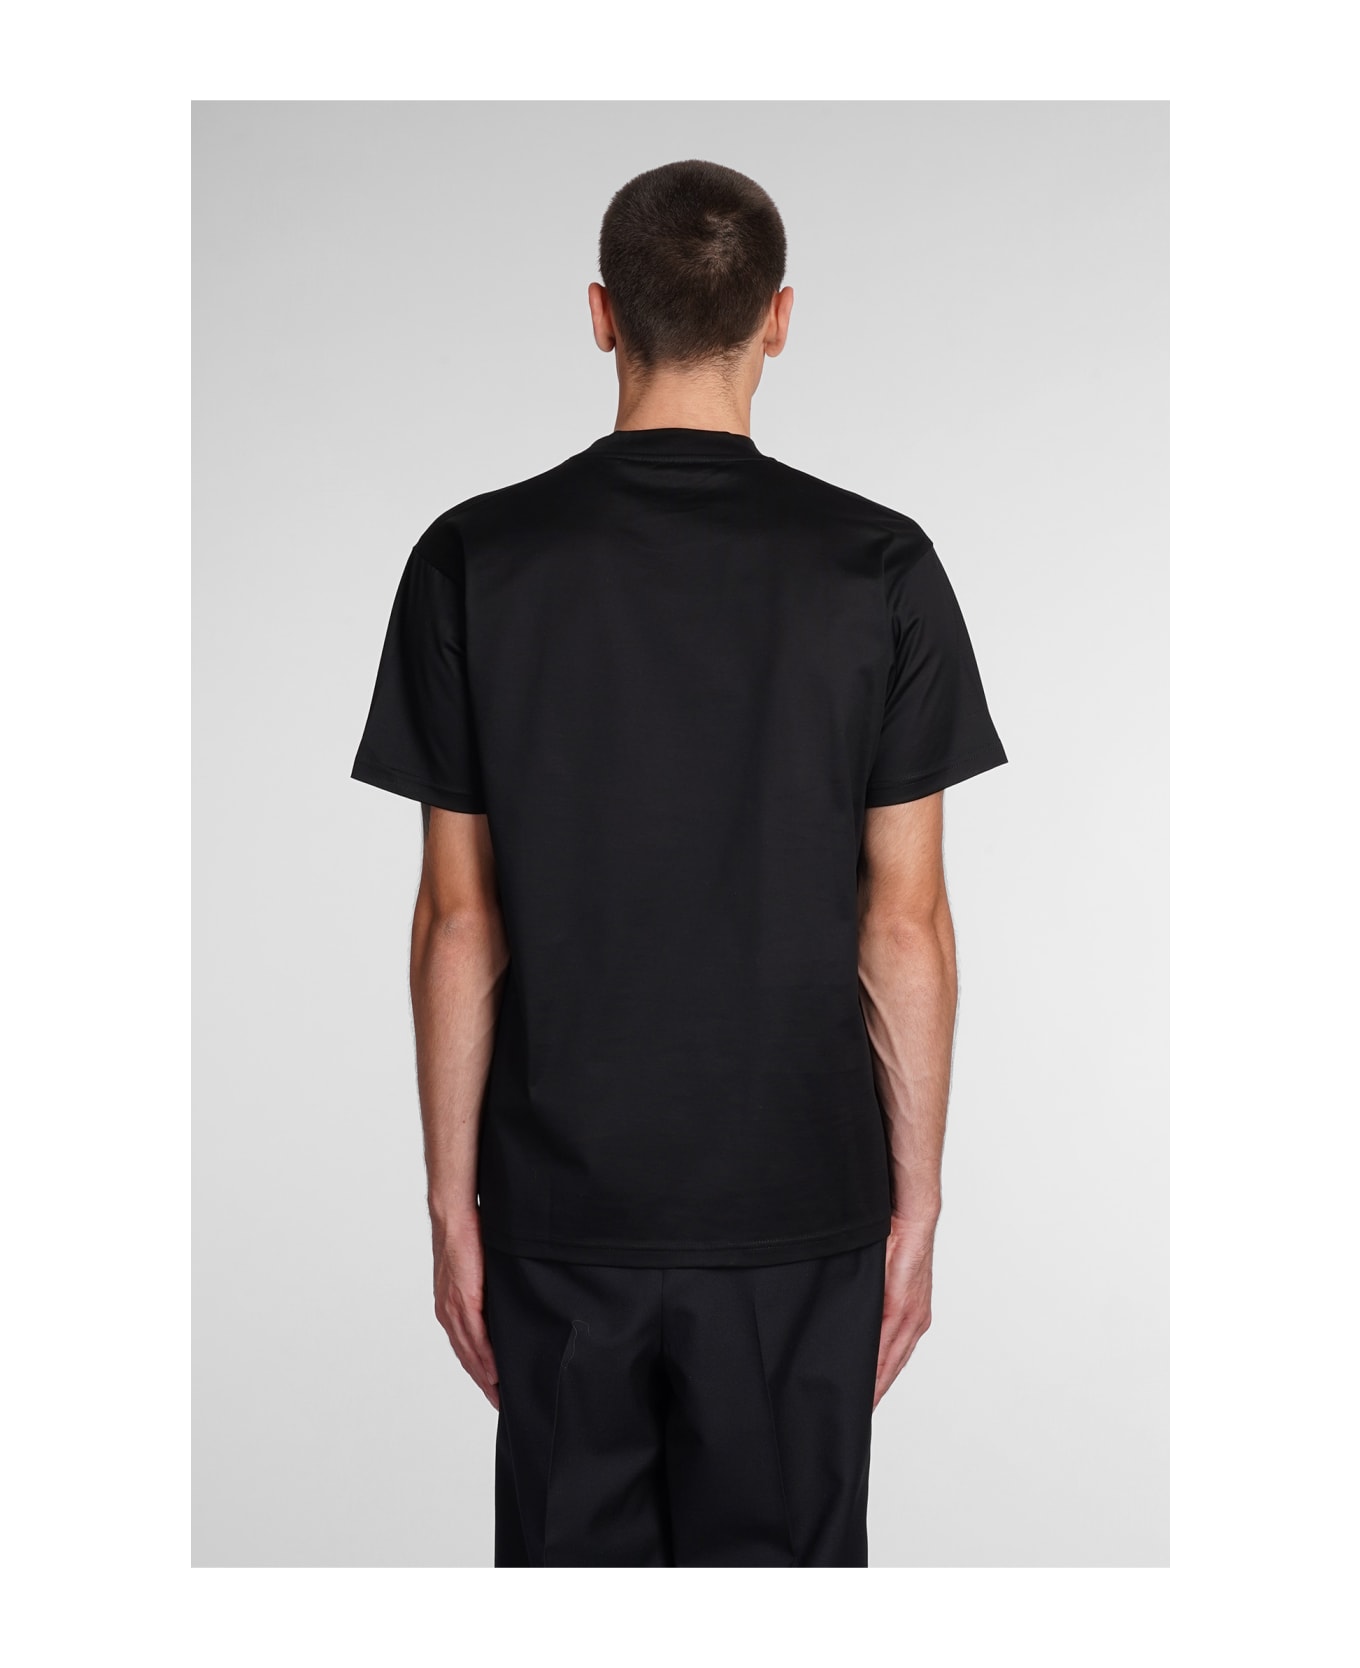 Low Brand B150 Embroidery T-shirt In Black Cotton - black